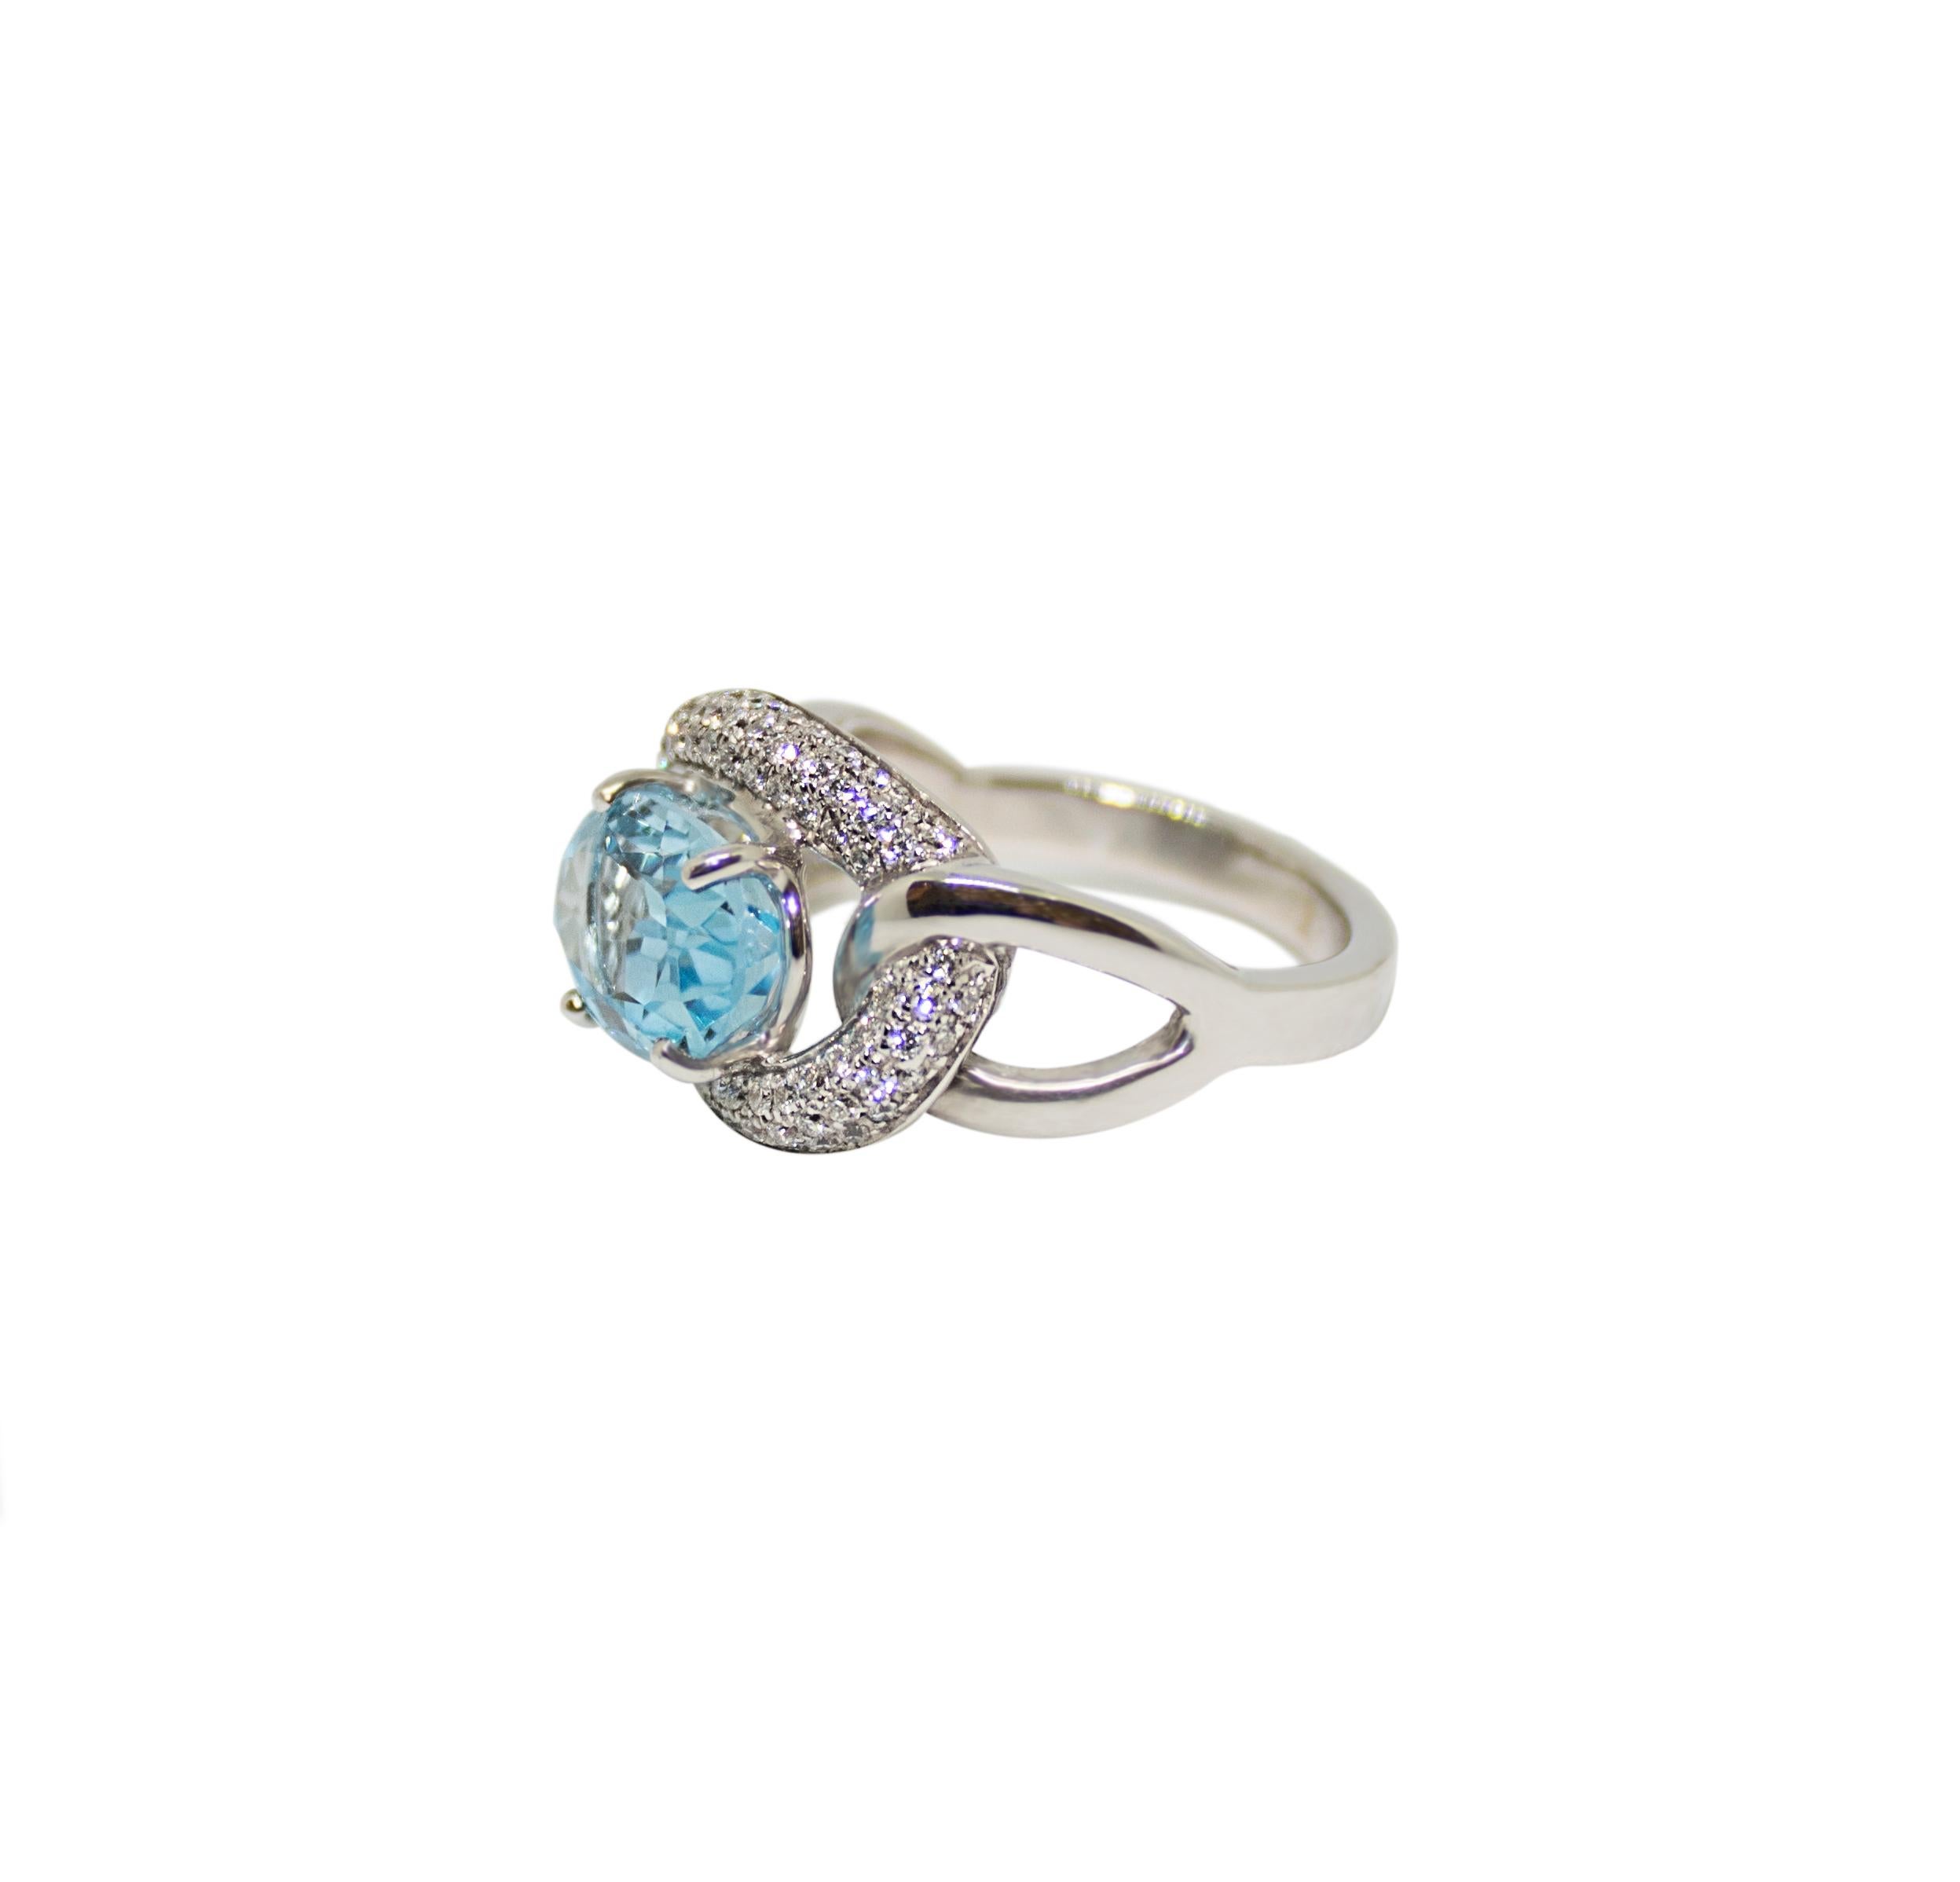 This ring features a 1 carat blue topaz centre stone, surrounded by a diamond halo and mounted in four claw clasp to an 18 carat white gold engagement ring.  It is ideal as an engagement ring or as a cocktail ring and because it is a bespoke piece,